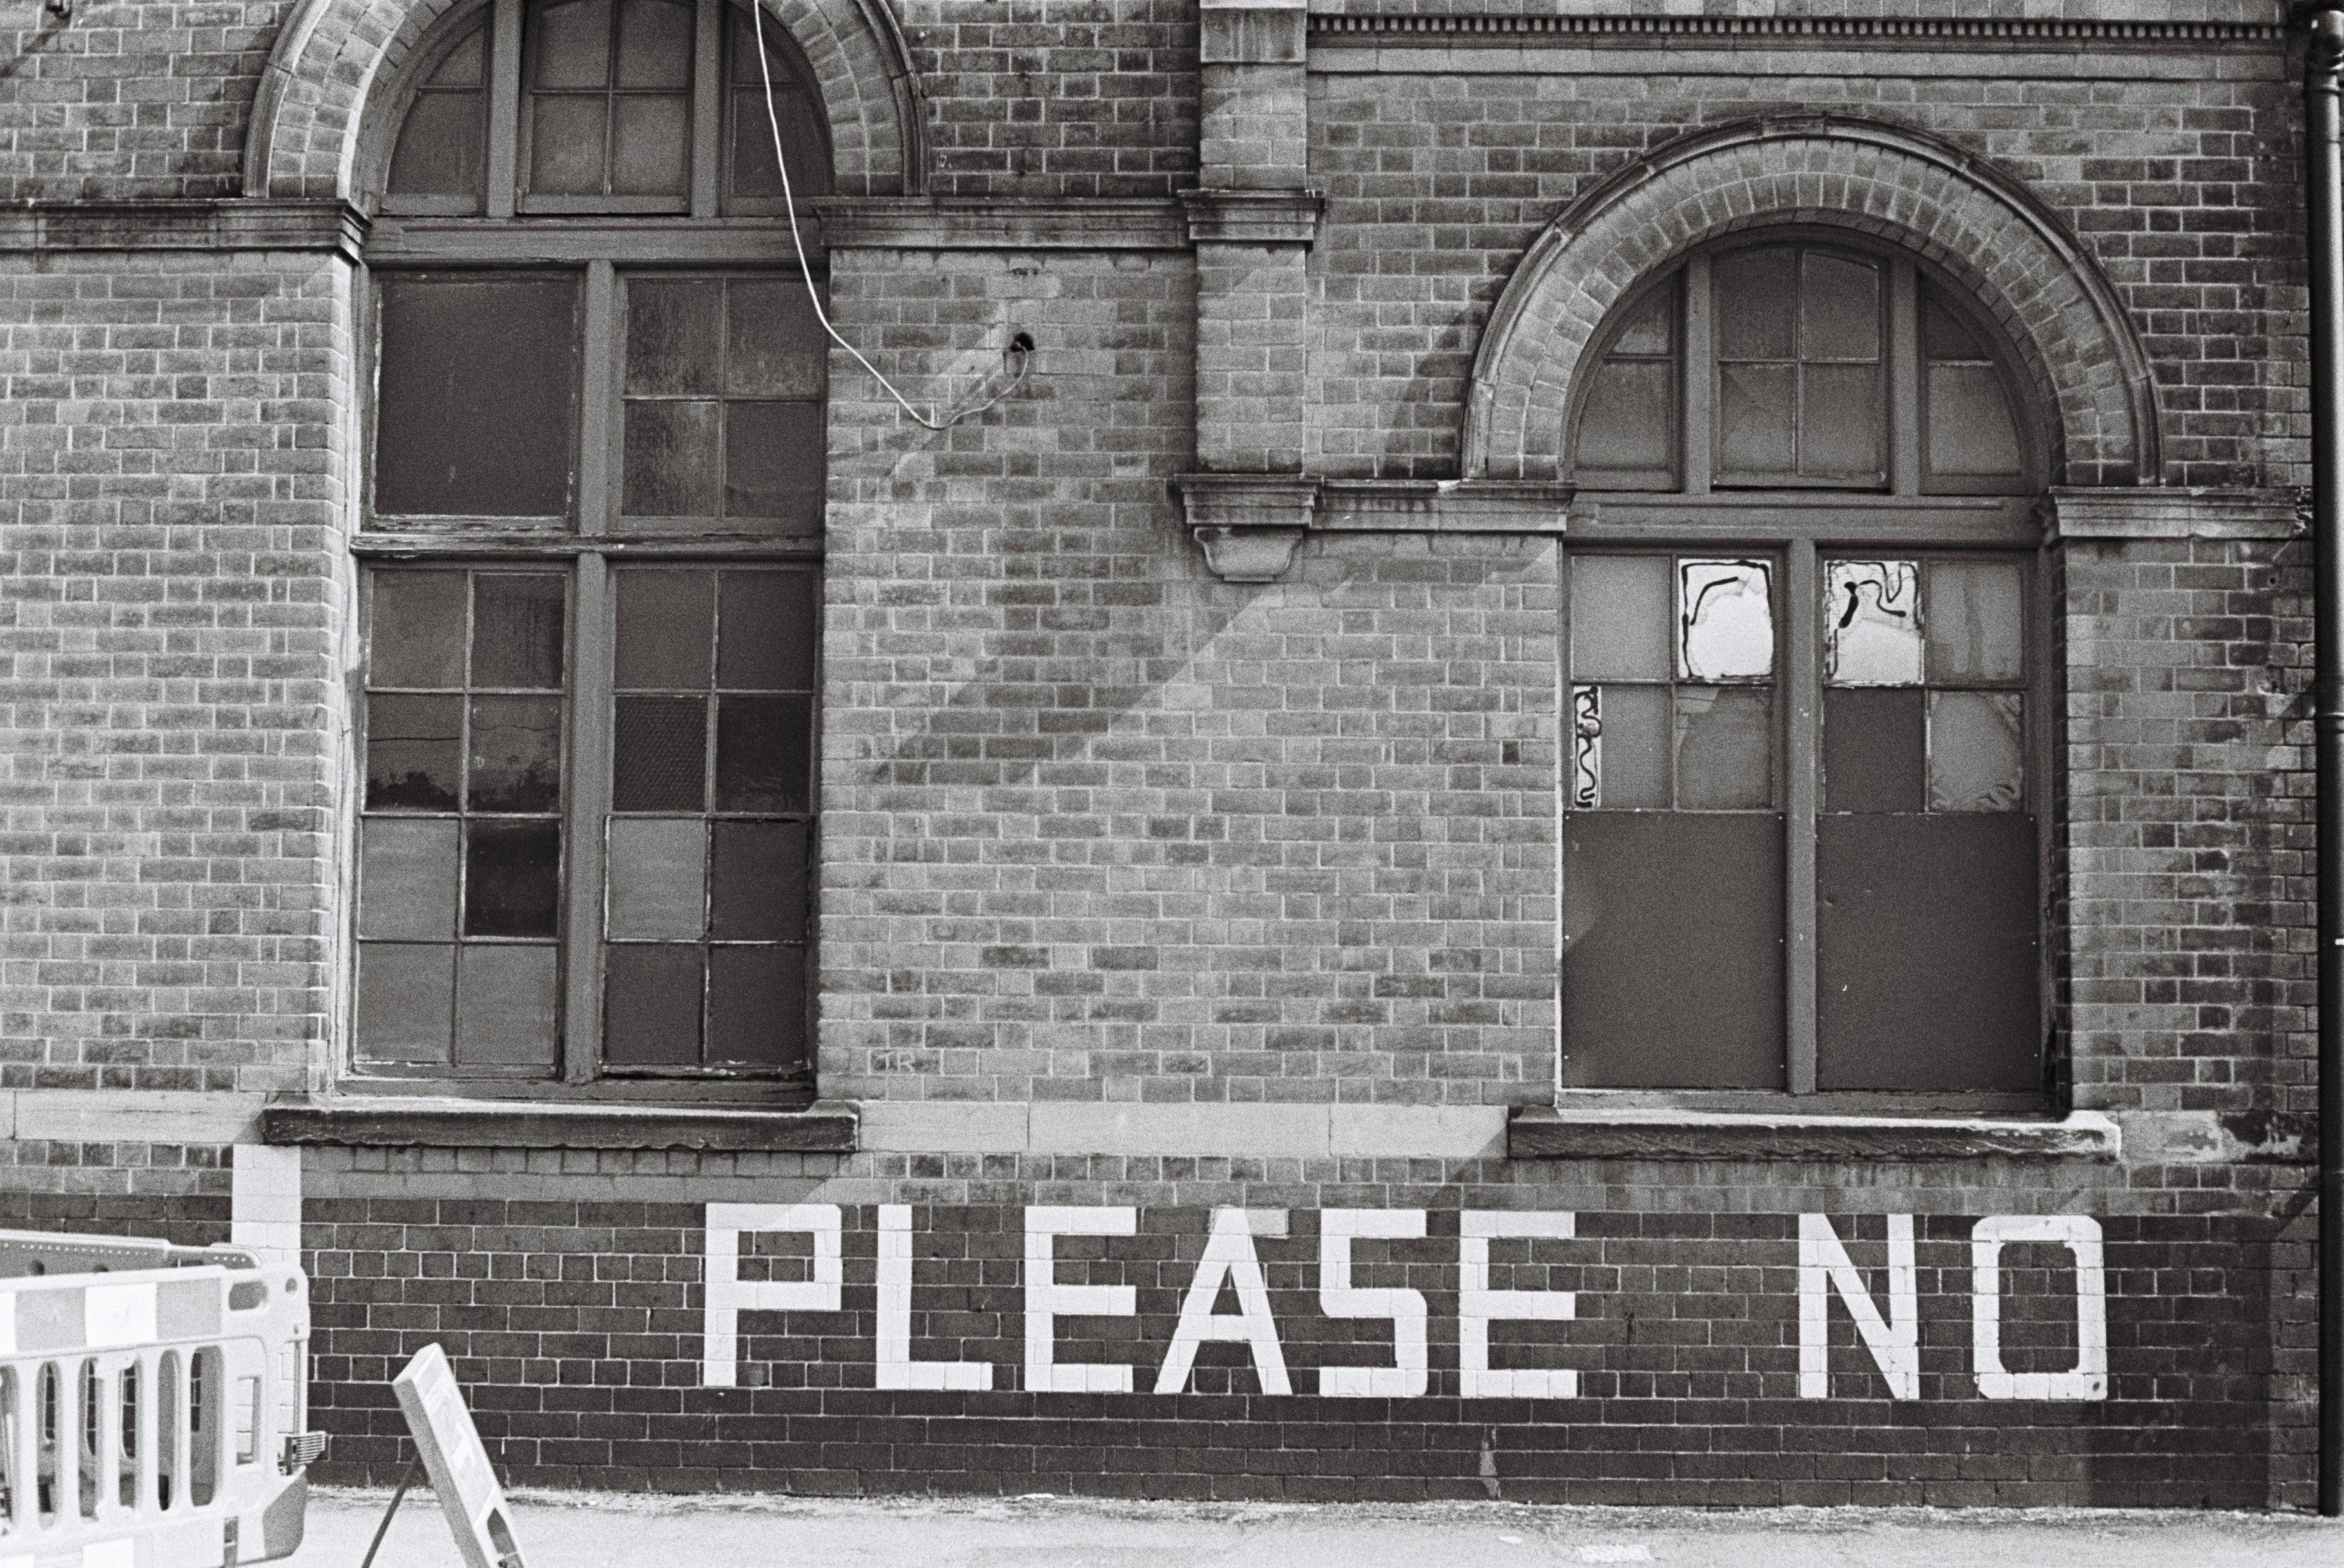 Black and white photograph of two large windows in a brick building with 'PLEASE NO' written in white on the wall below.